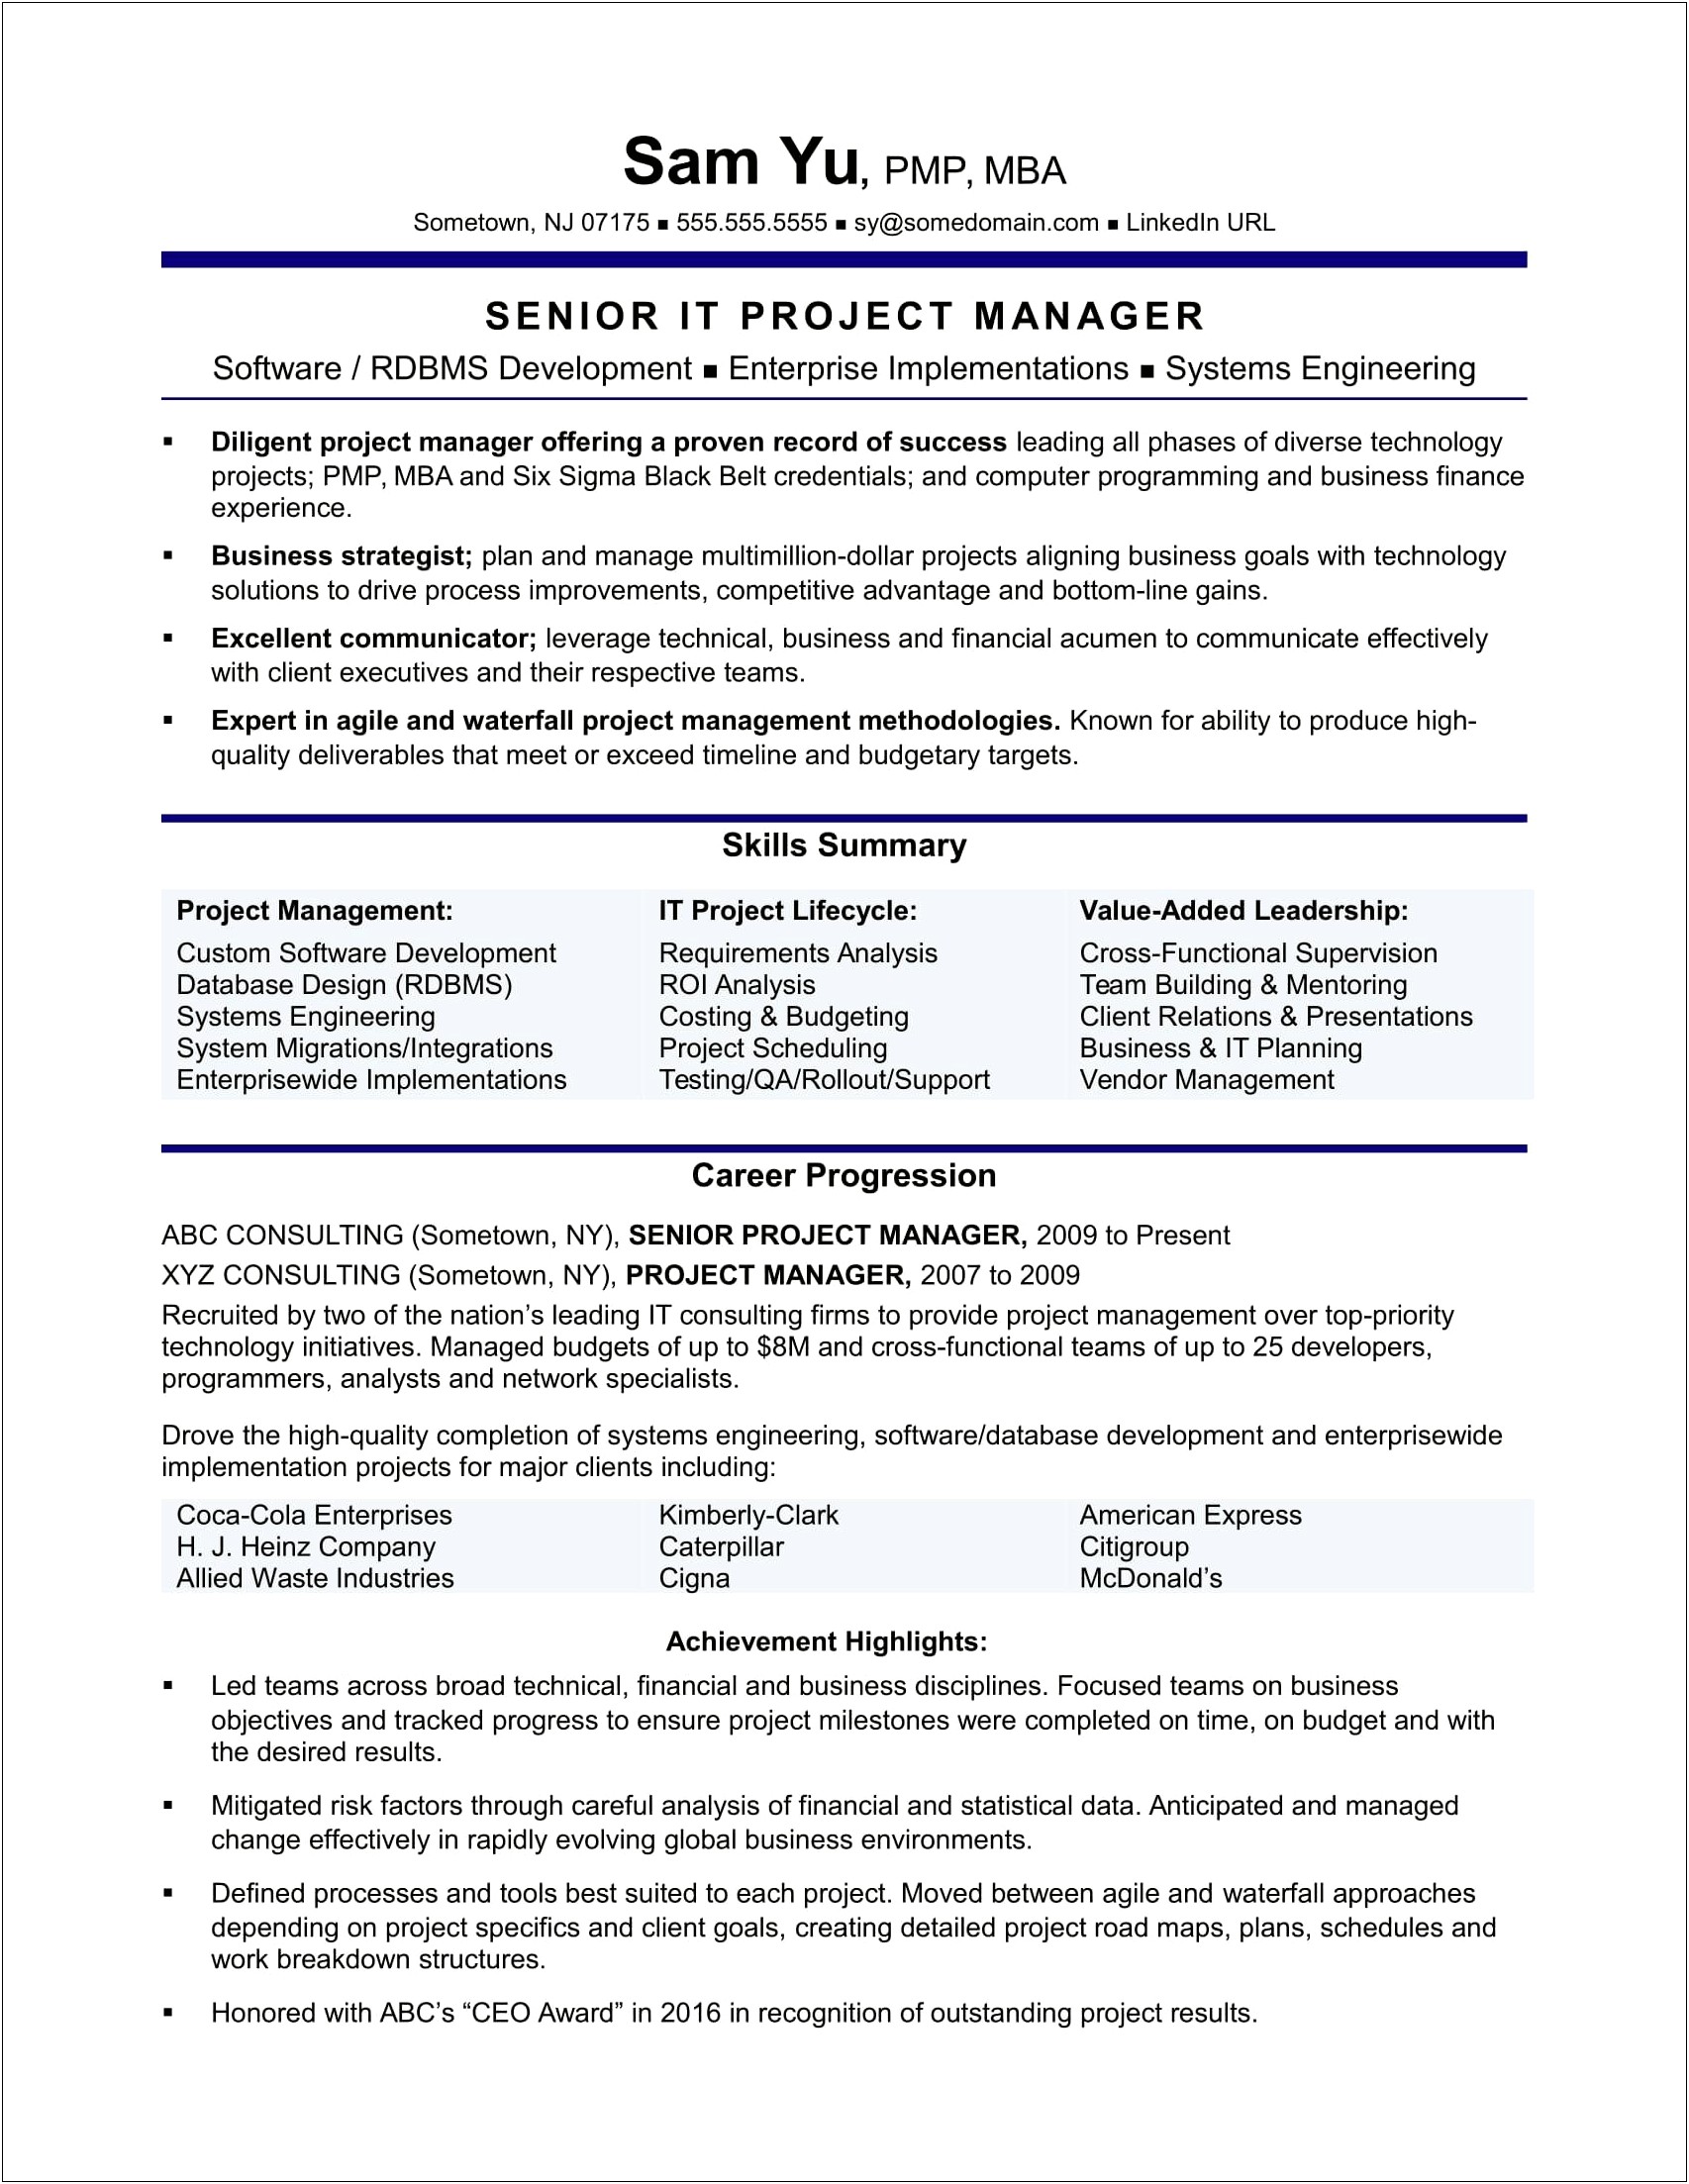 Resume Keywords For It Project Manager